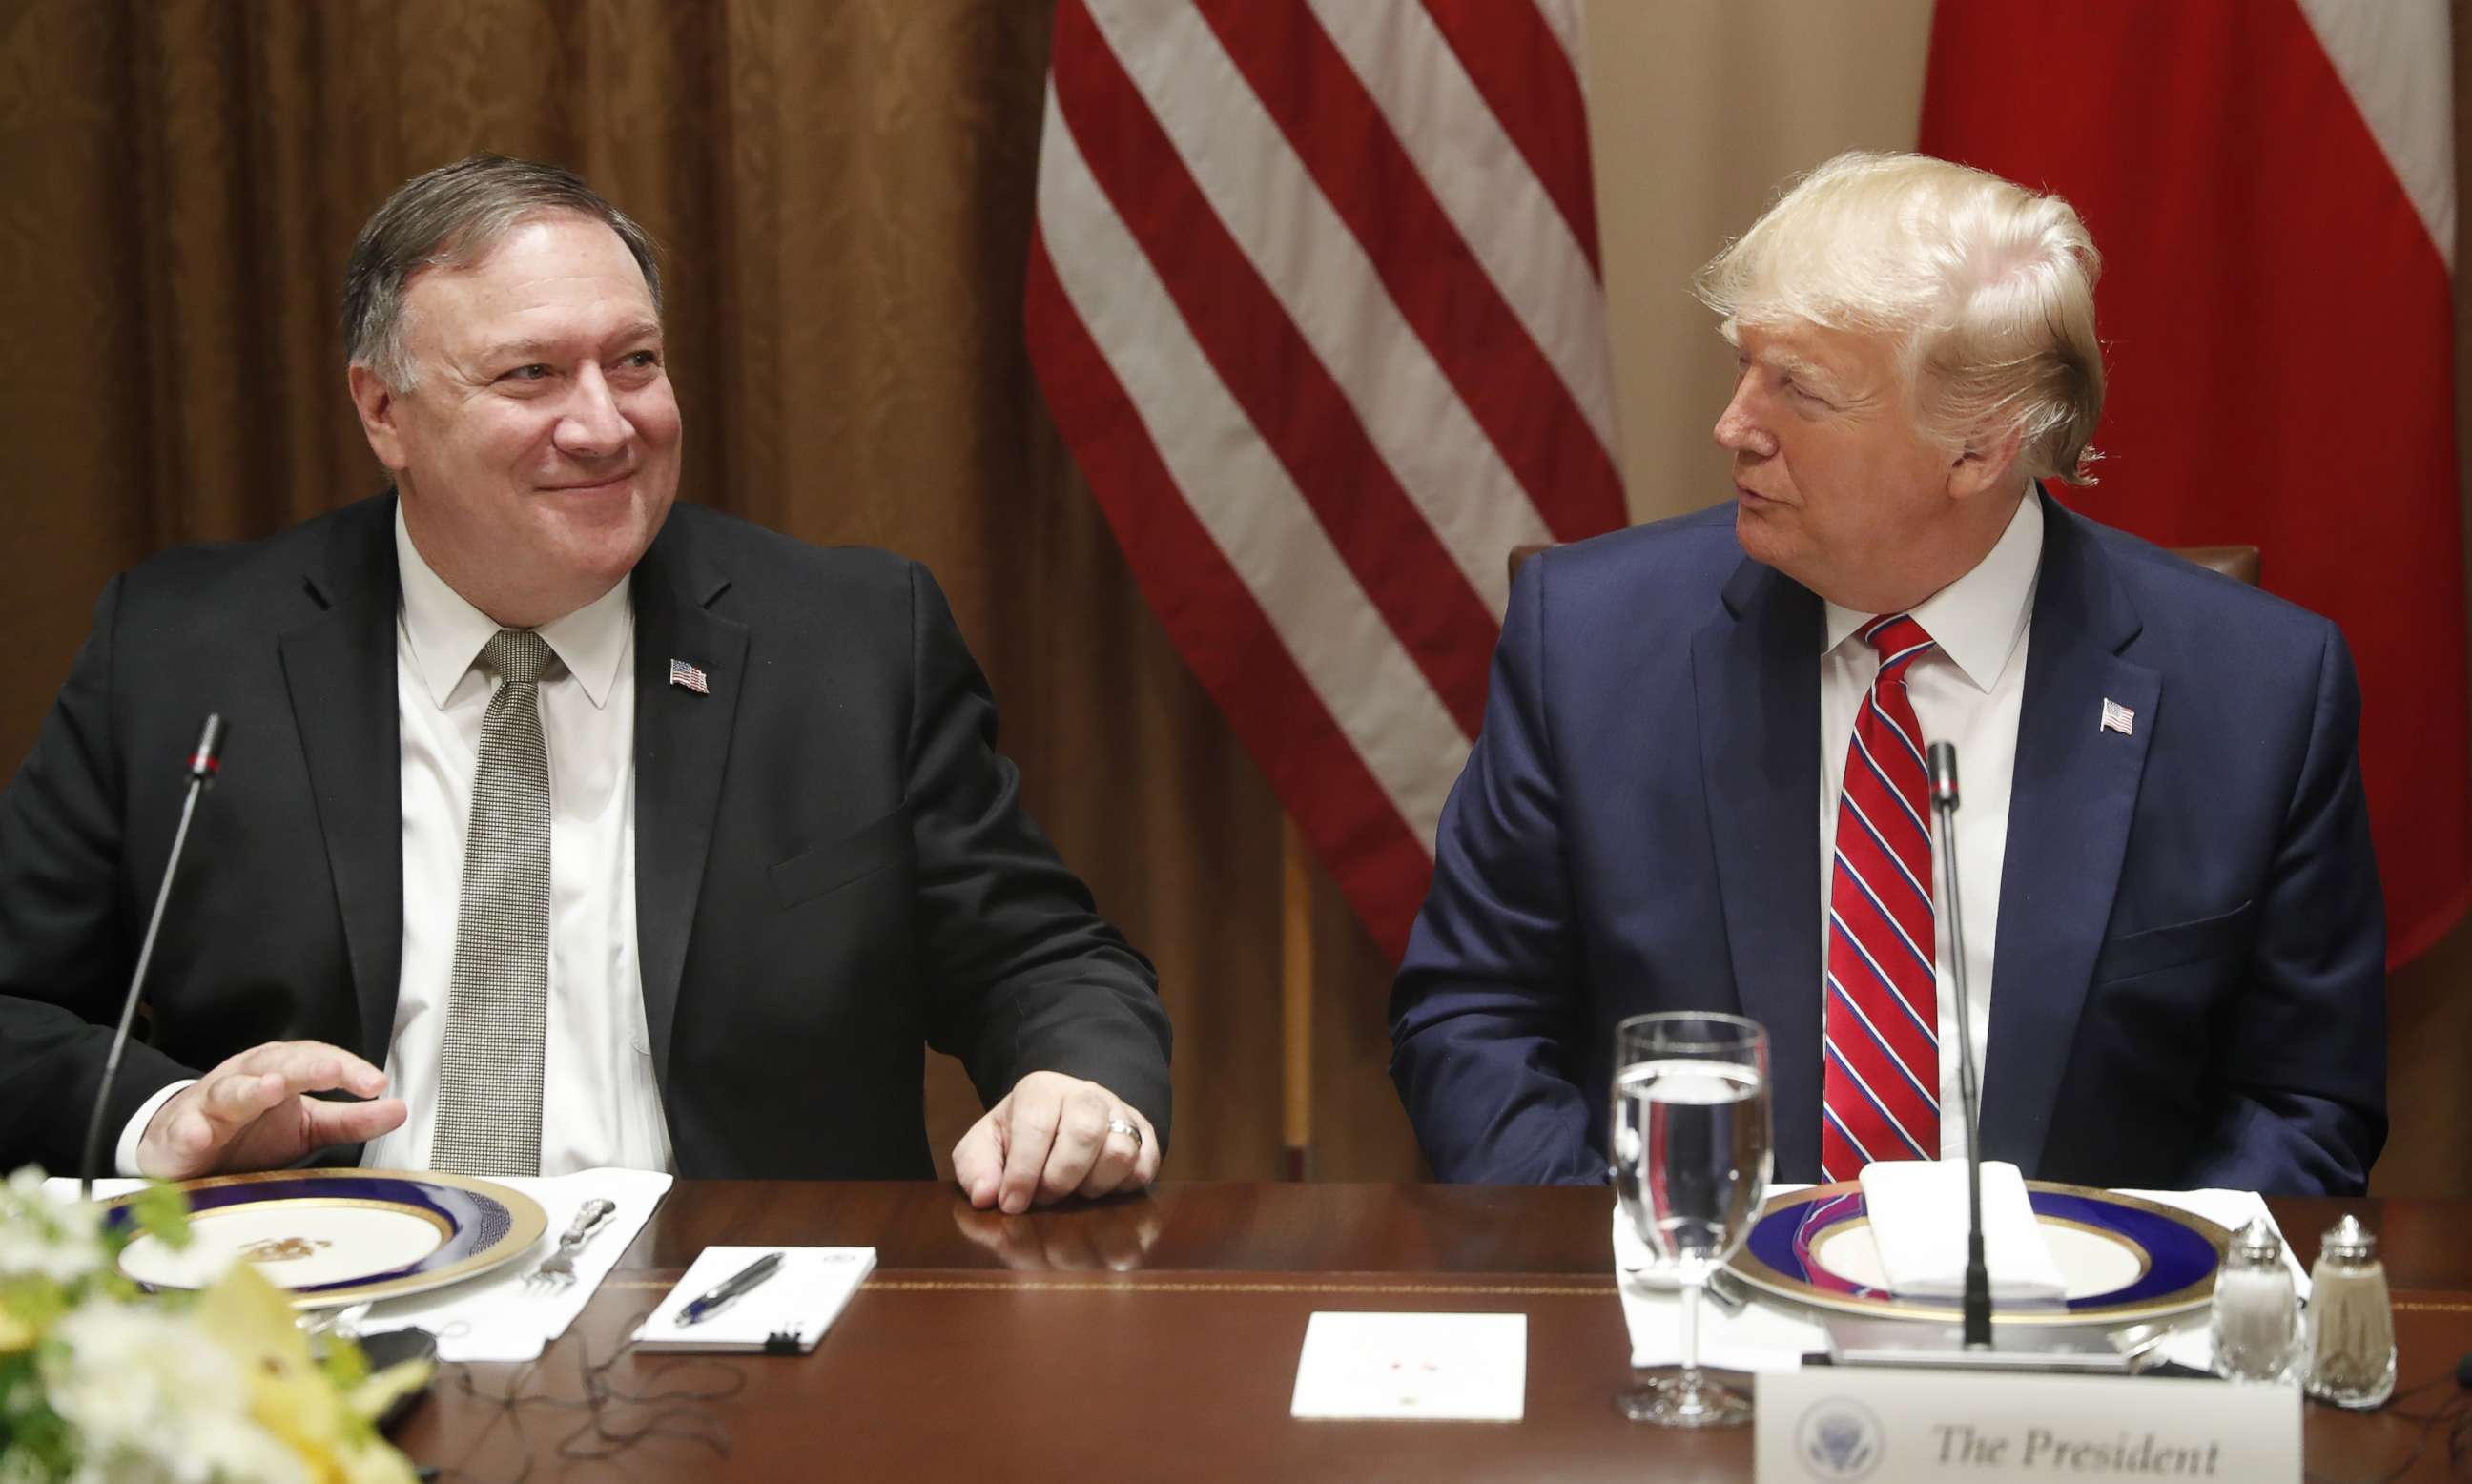 PHOTO: President Donald Trump, right, speaks with Mike Pompeo, U.S. secretary of state, left, during a luncheon at the White House in Washington, D.C. on June 12, 2019.